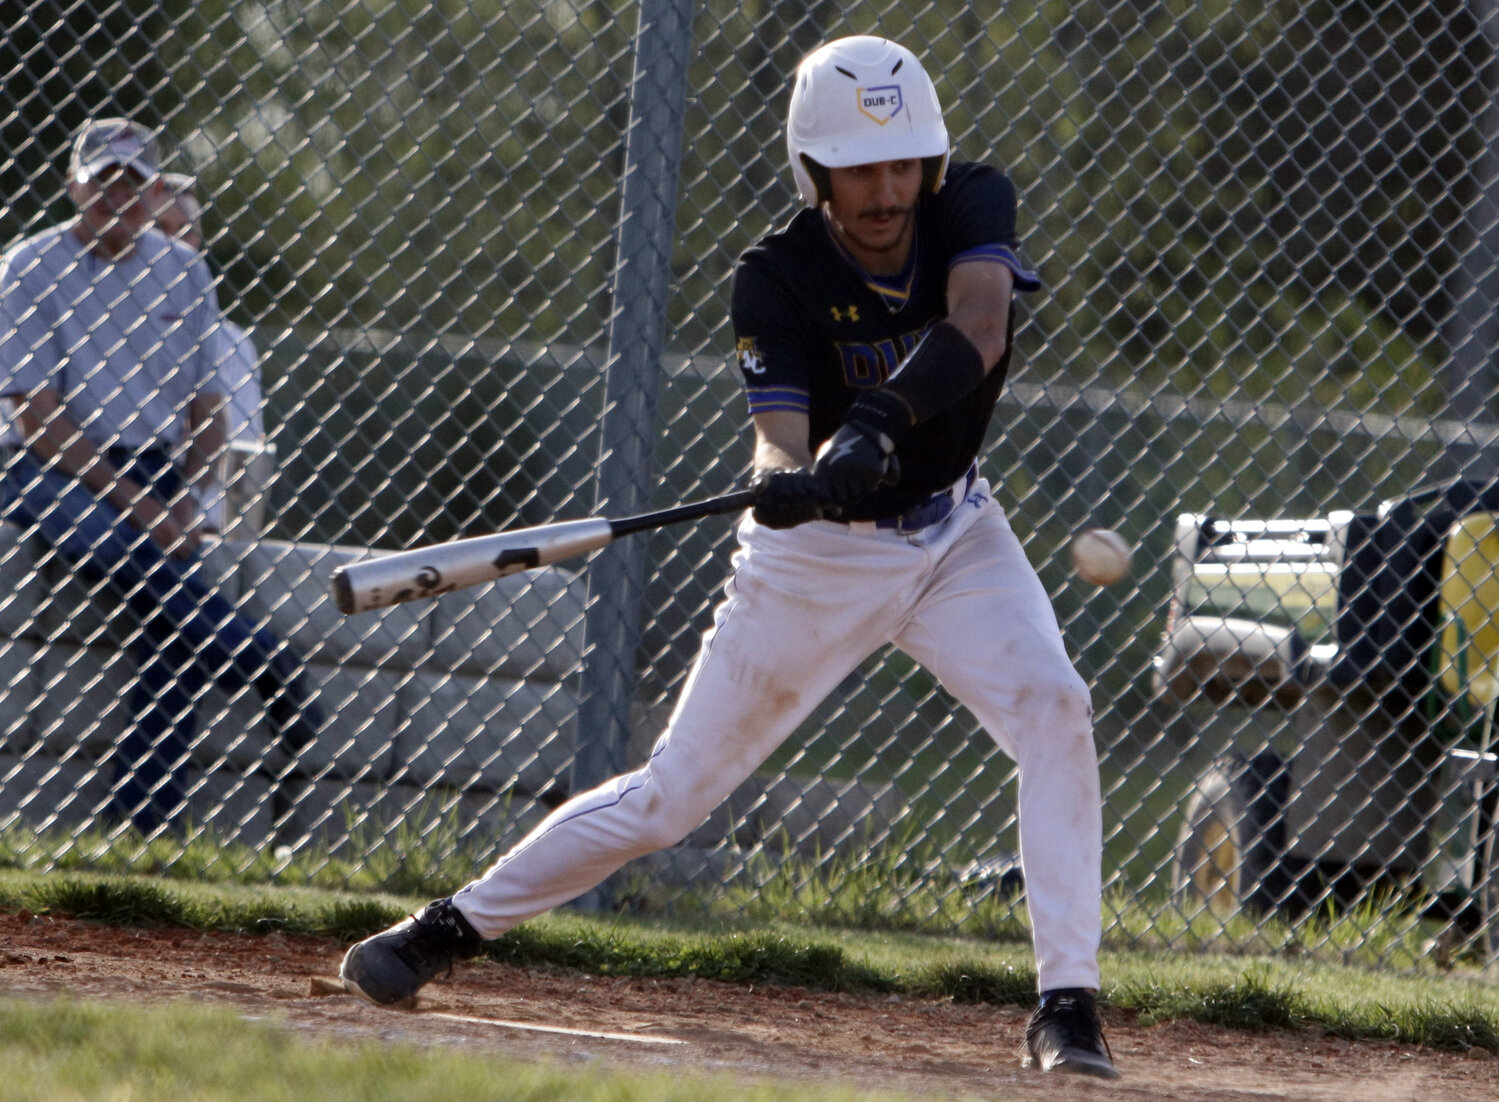 Wright City’s Nick Moore prepares to swing at a pitch during a game against Elsberry this past season. Moore was named to the Class 4 all-state first team as an infielder